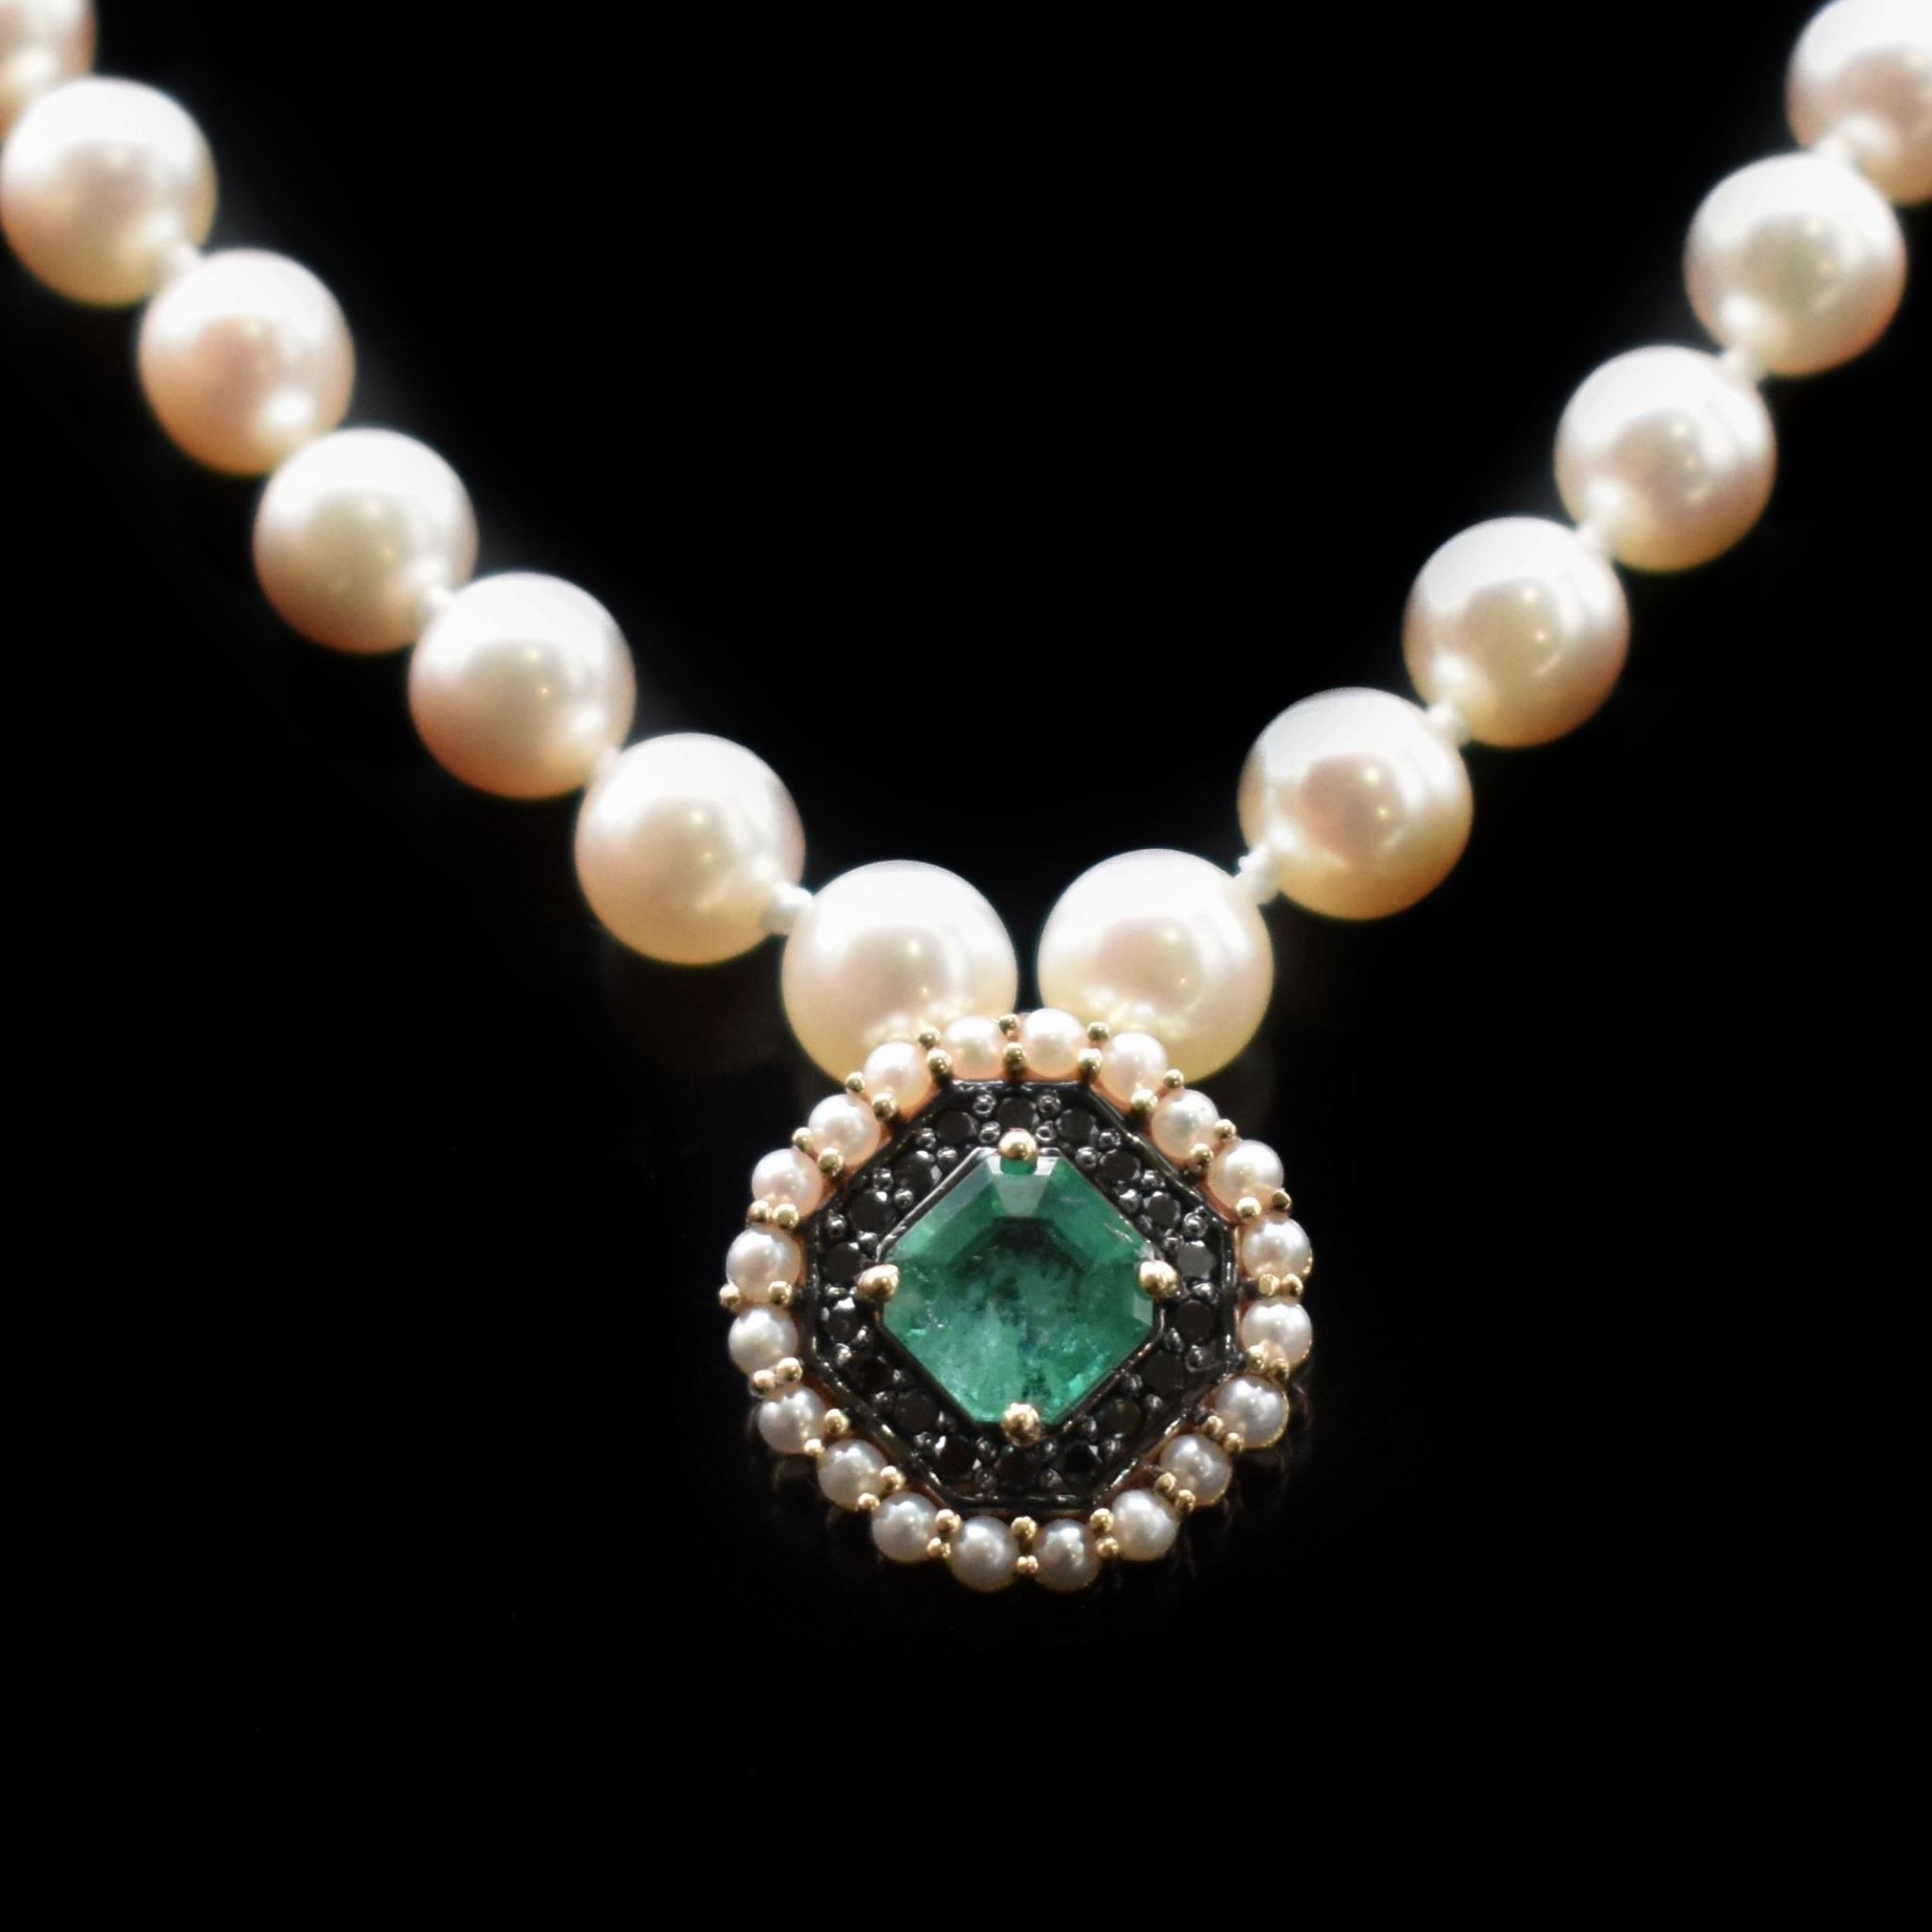 Emerald & Black Diamond Pearl Choker Necklace- One Of A Kind Series ...